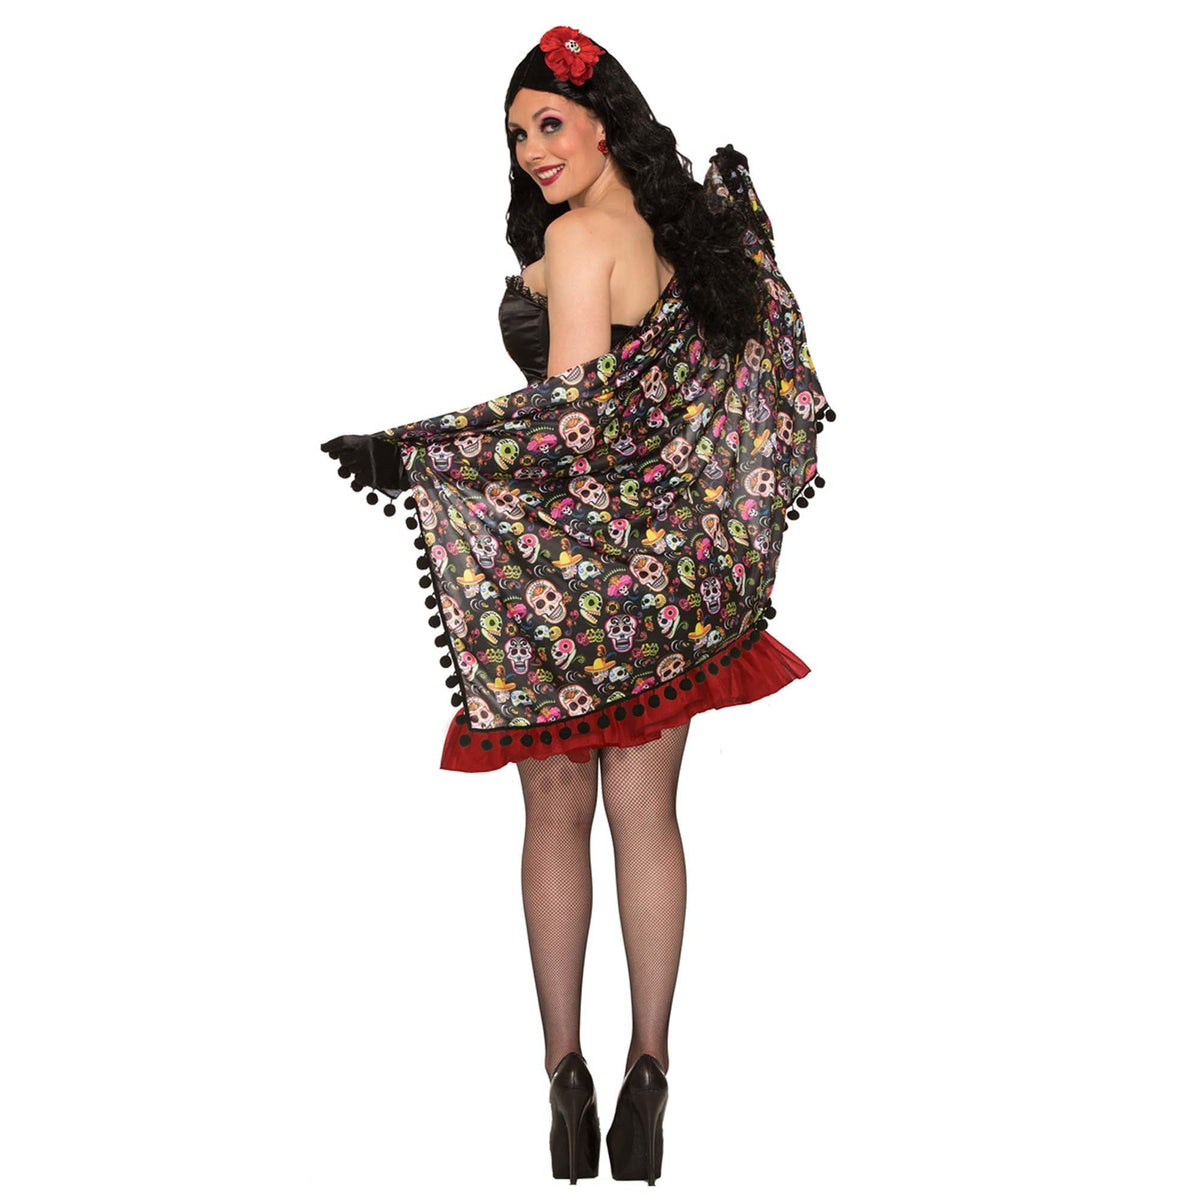 RUBIES II (Ruby Slipper Sales) Costume Accessories Day of the Dead Shawl, 1 Count